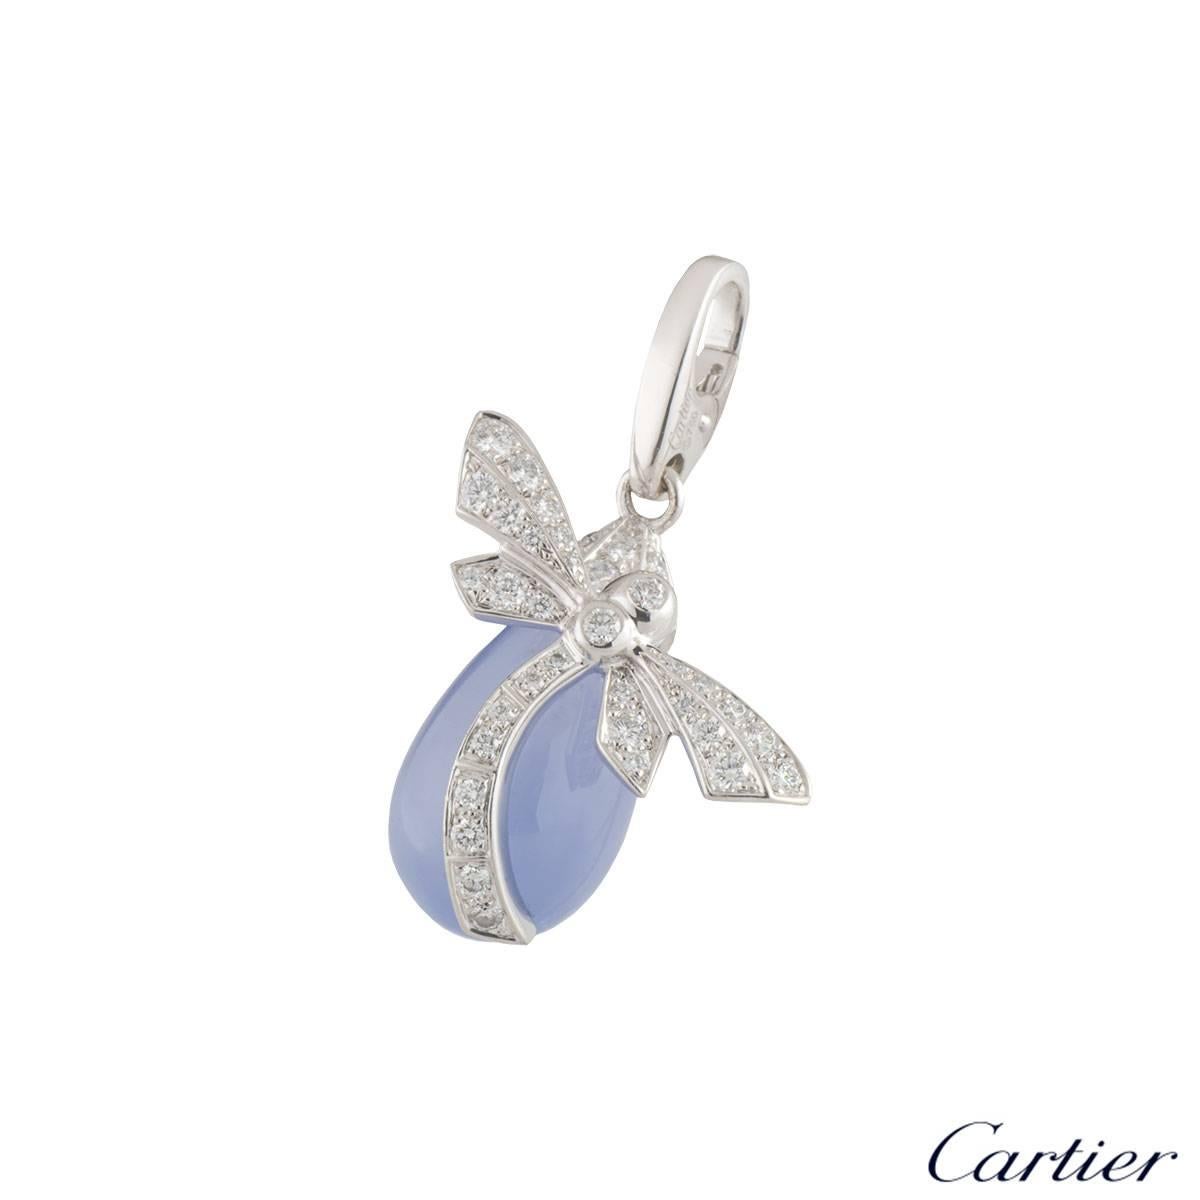 A stunning 18k white gold Cartier dragonfly charm from the Jewelled Insects collection, part of Cartier's menagerie. The charm comprises of  a dragonfly motif encrusted in round brilliant cut diamonds, with a total weight of approximately 0.38ct, F